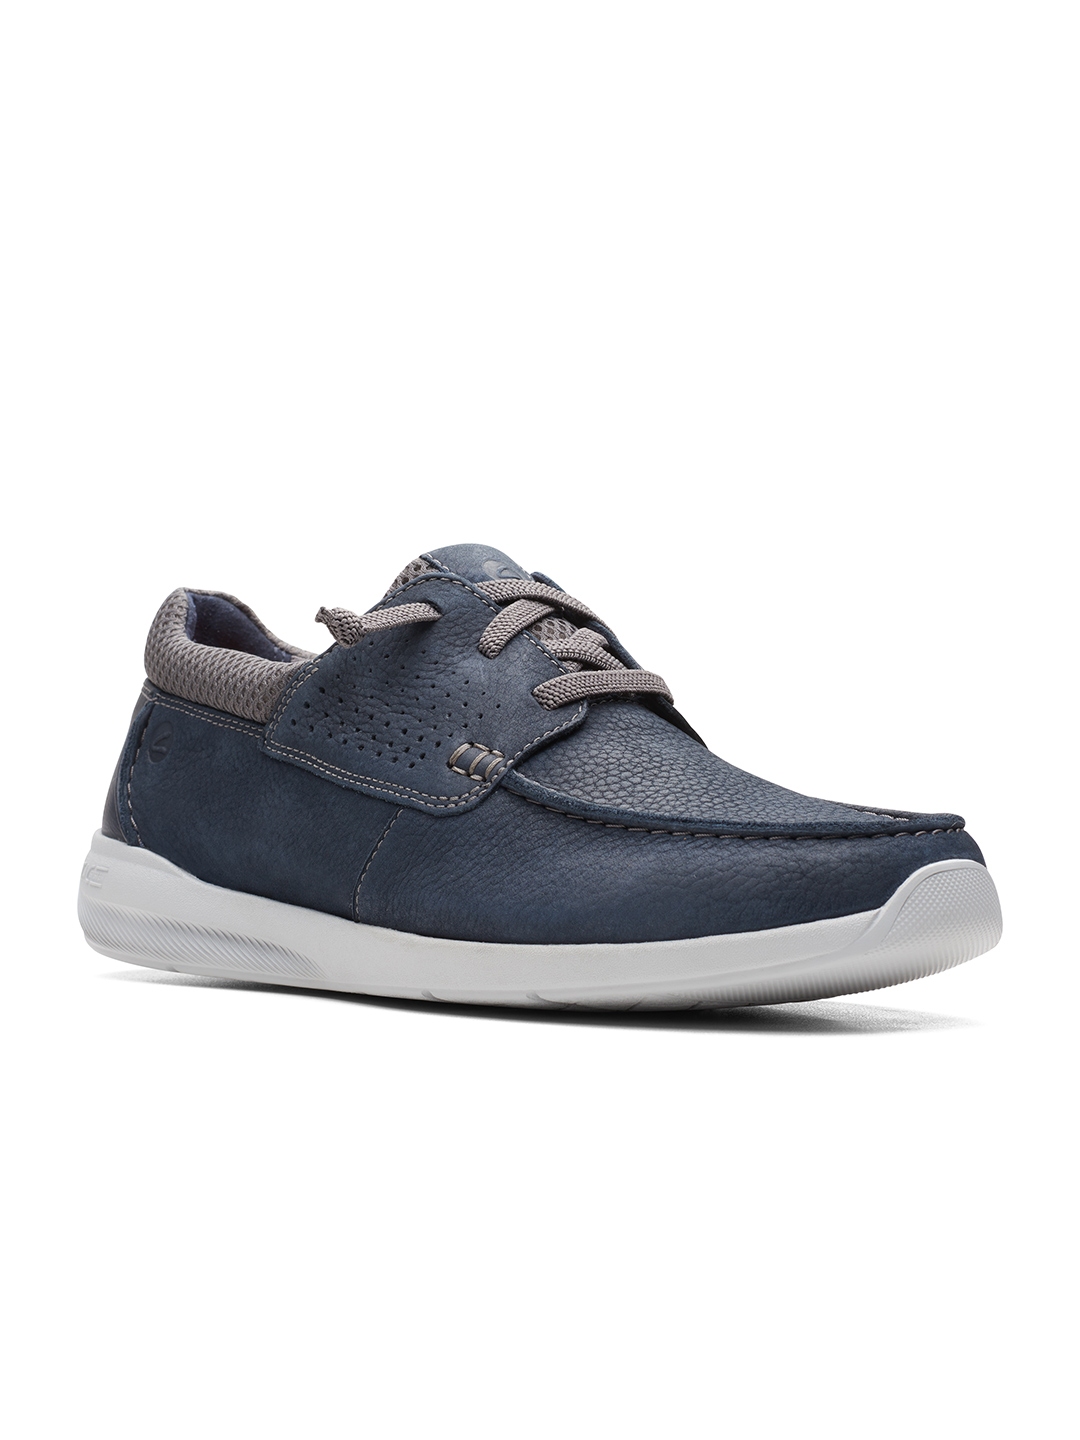 Buy Clarks Men Blue Perforations Nubuck Sneakers - Casual Shoes for Men ...